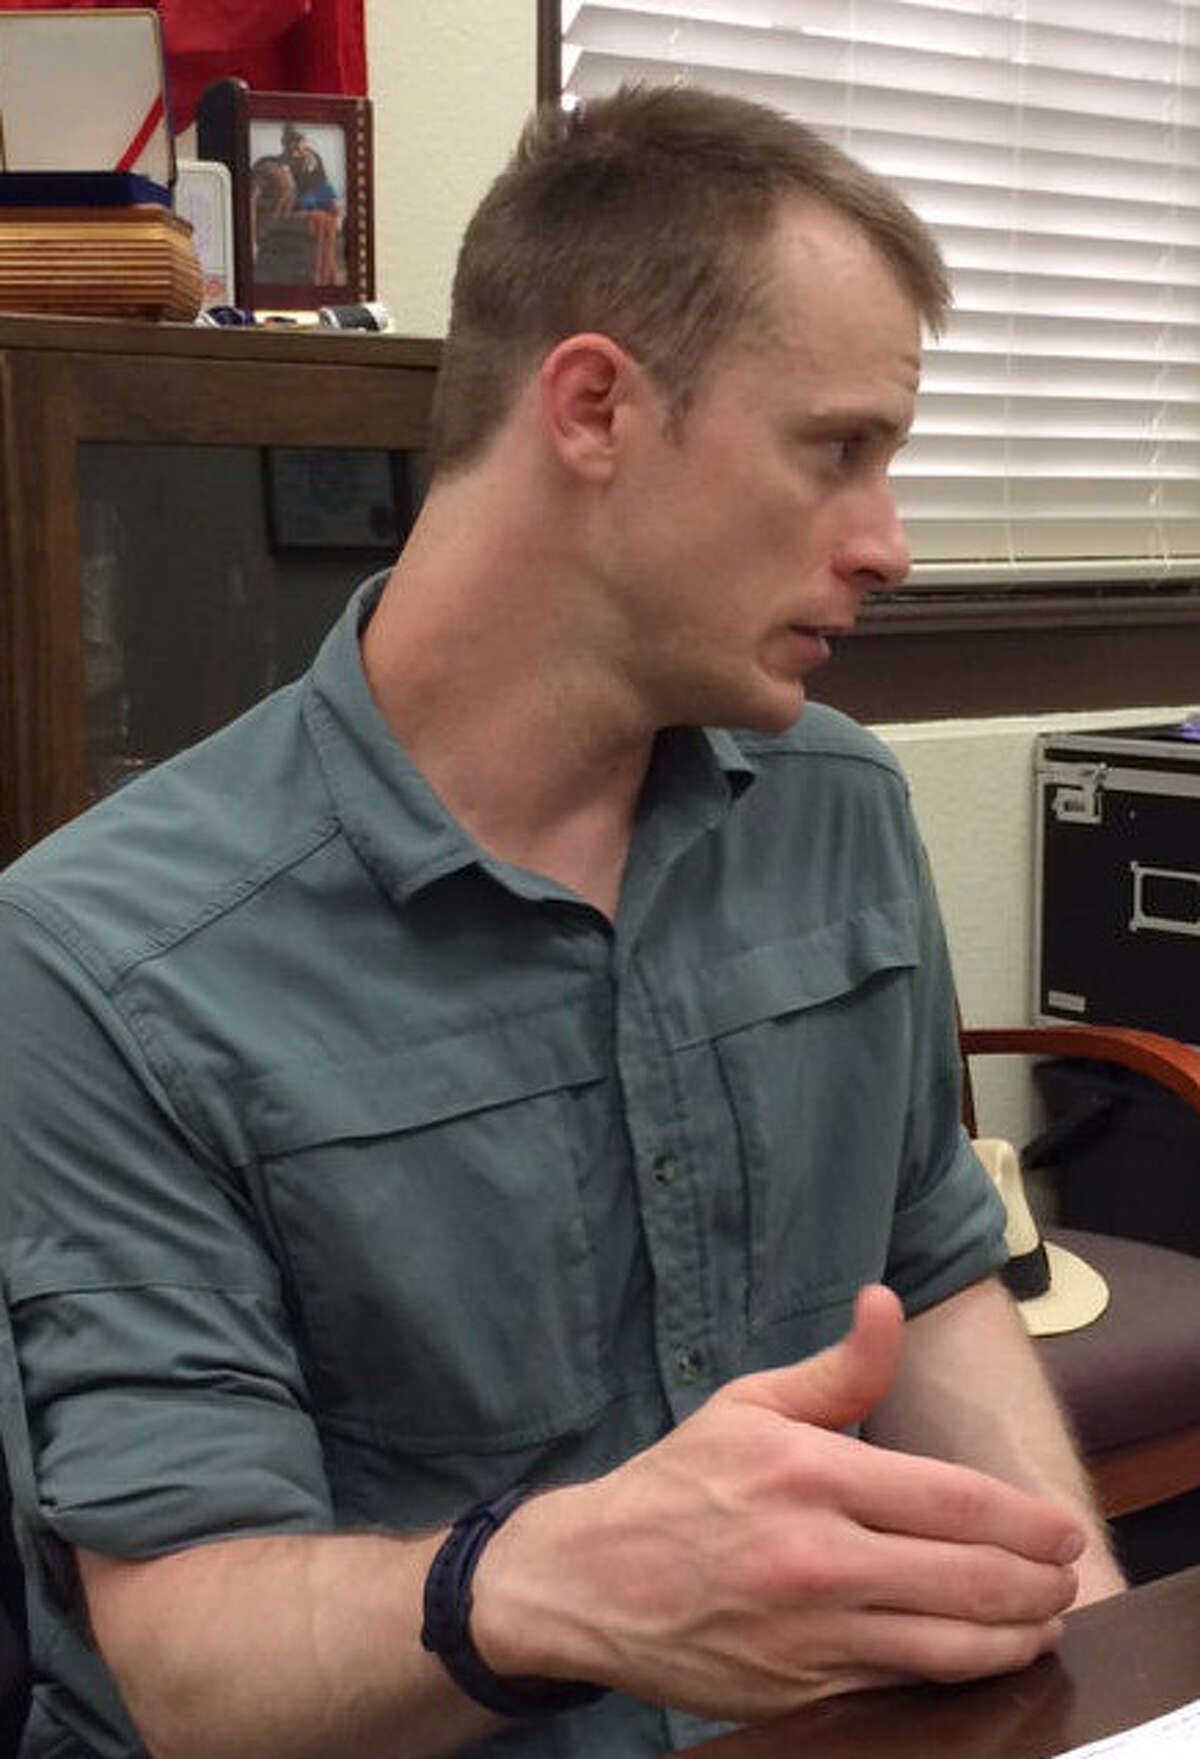 Army Sgt. Bowe Bergdahl has been at Joint Base San Antonio-Fort Sam Houston since June 13.